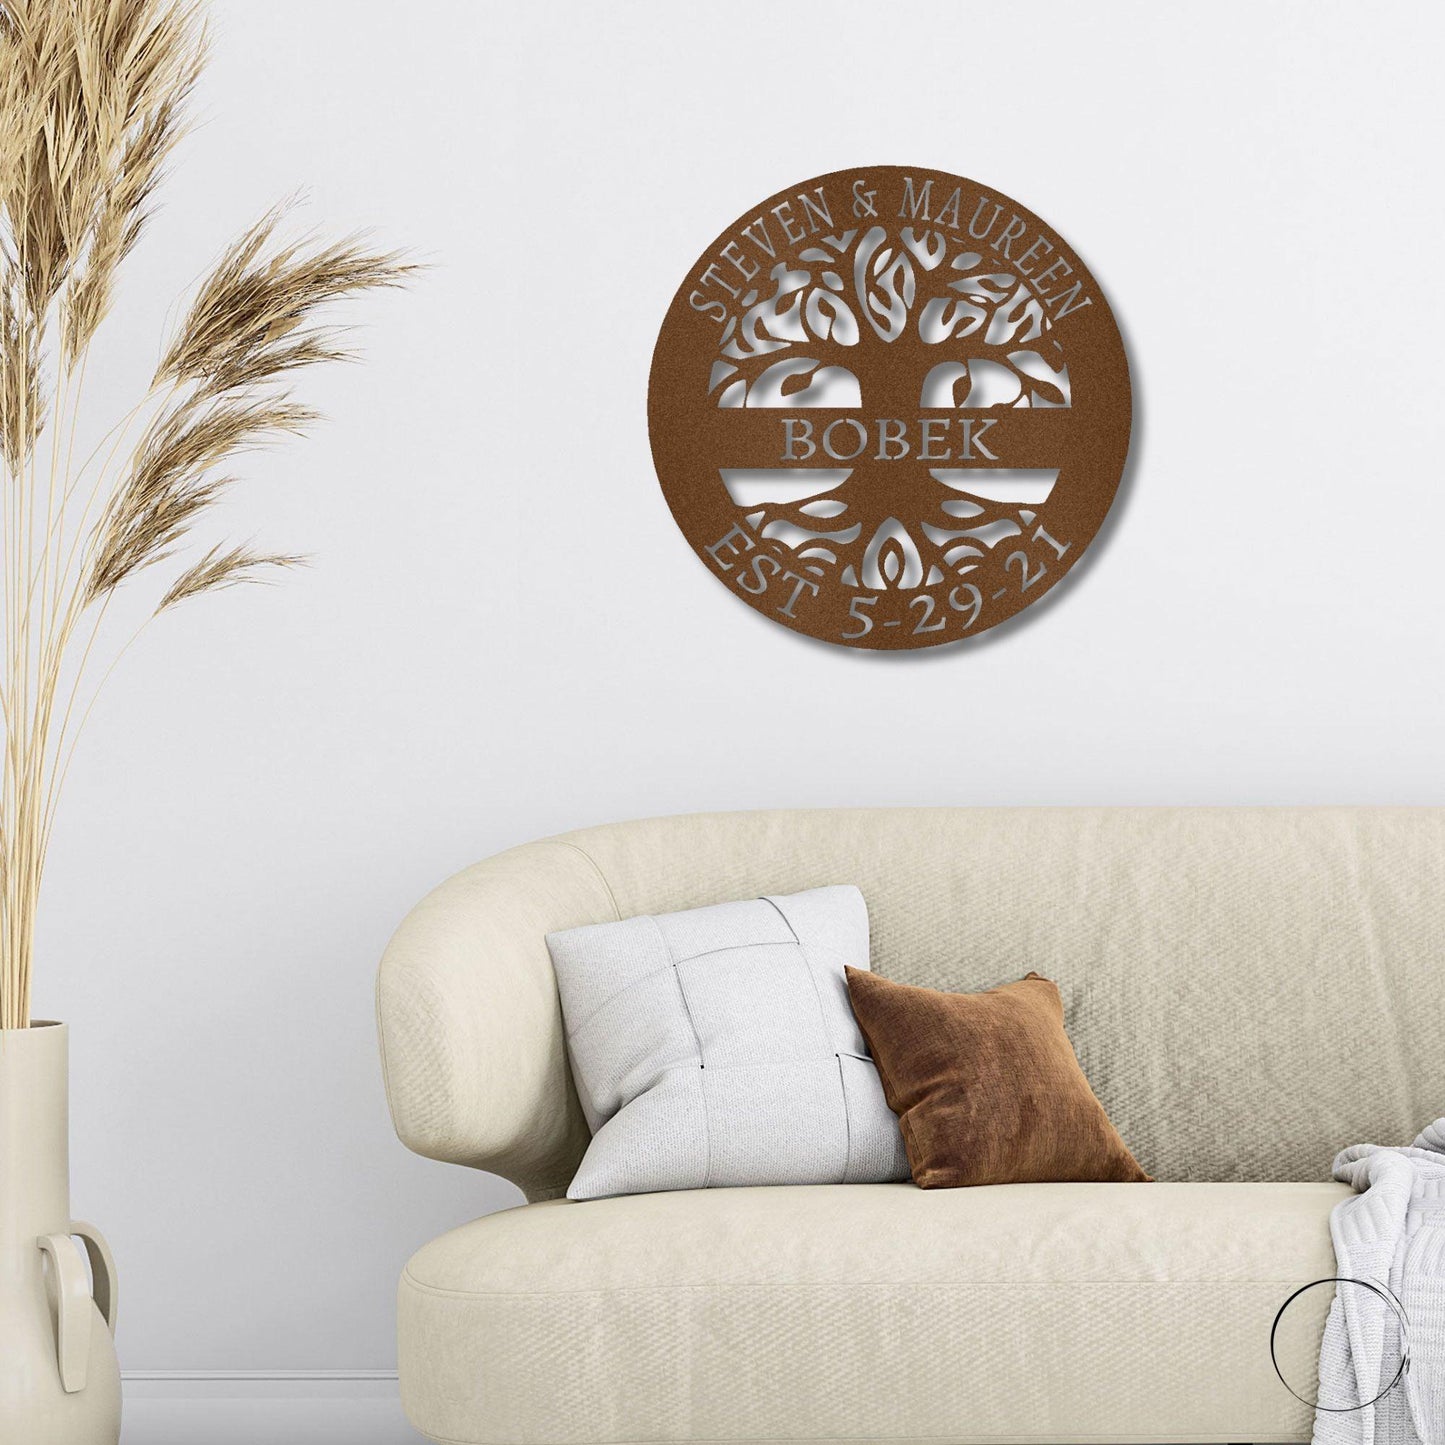 Personalized Tree of Life Metal Wall Art: Celebrate Heritage & Special Moments - Mallard Moon Gift Shop